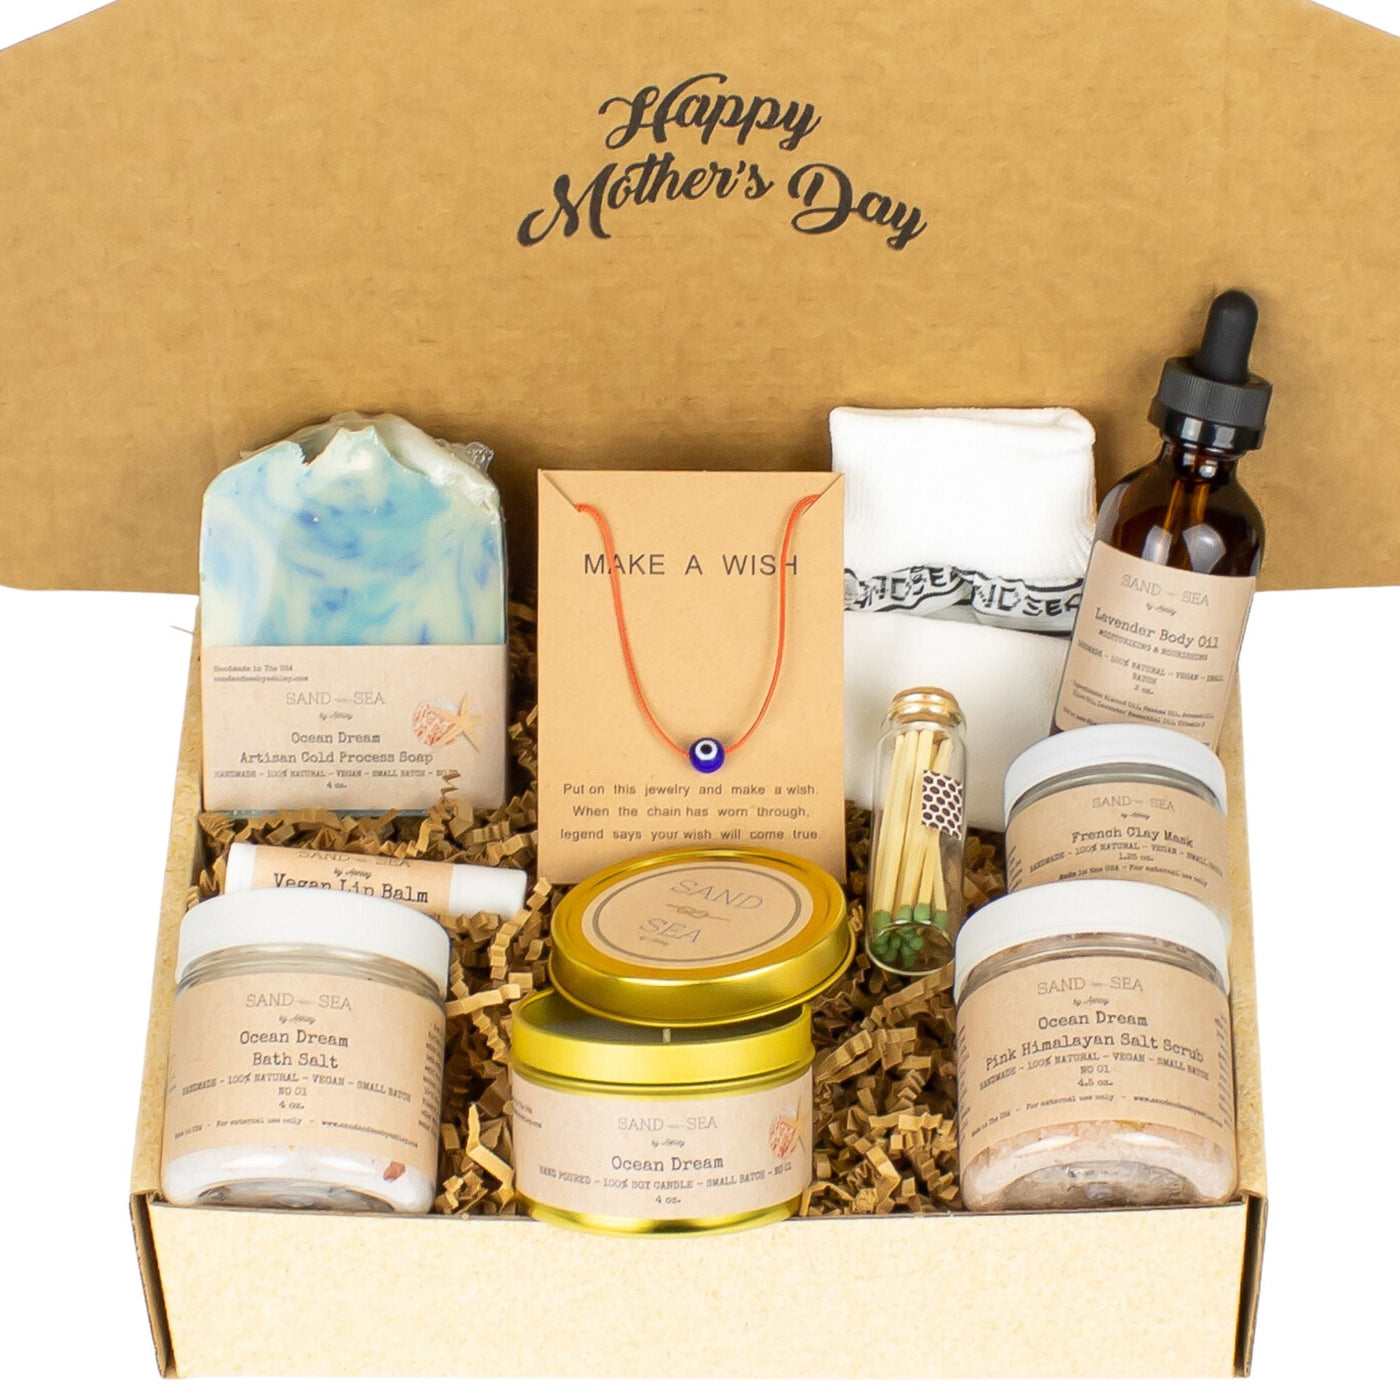 Happy Mothers Day Gift Baskets - Spa Self Care Package for Women 10 PC